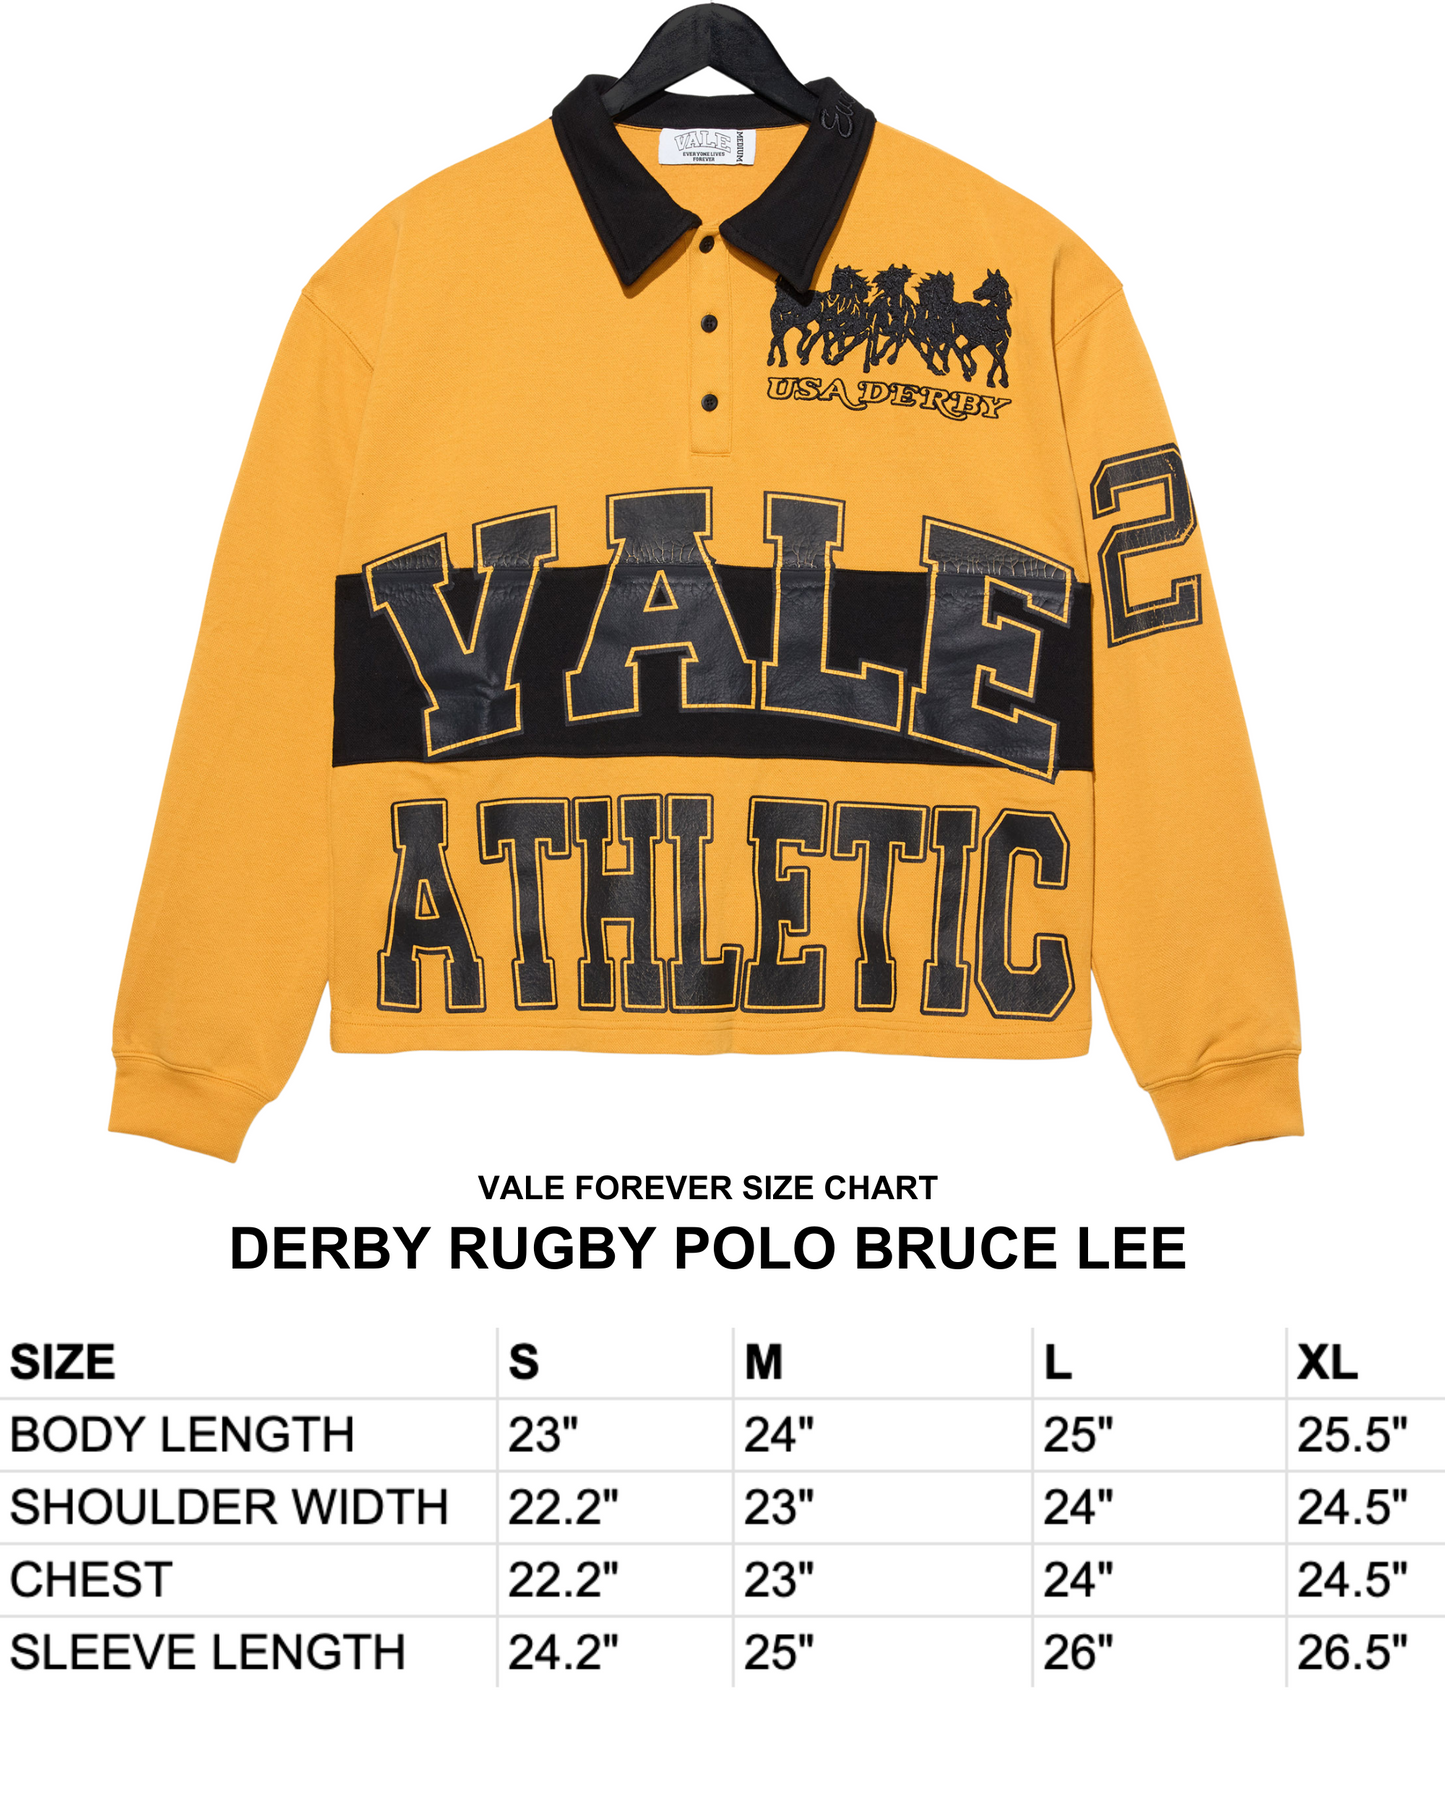 DERBY RUGBY POLO BRUCE LEE